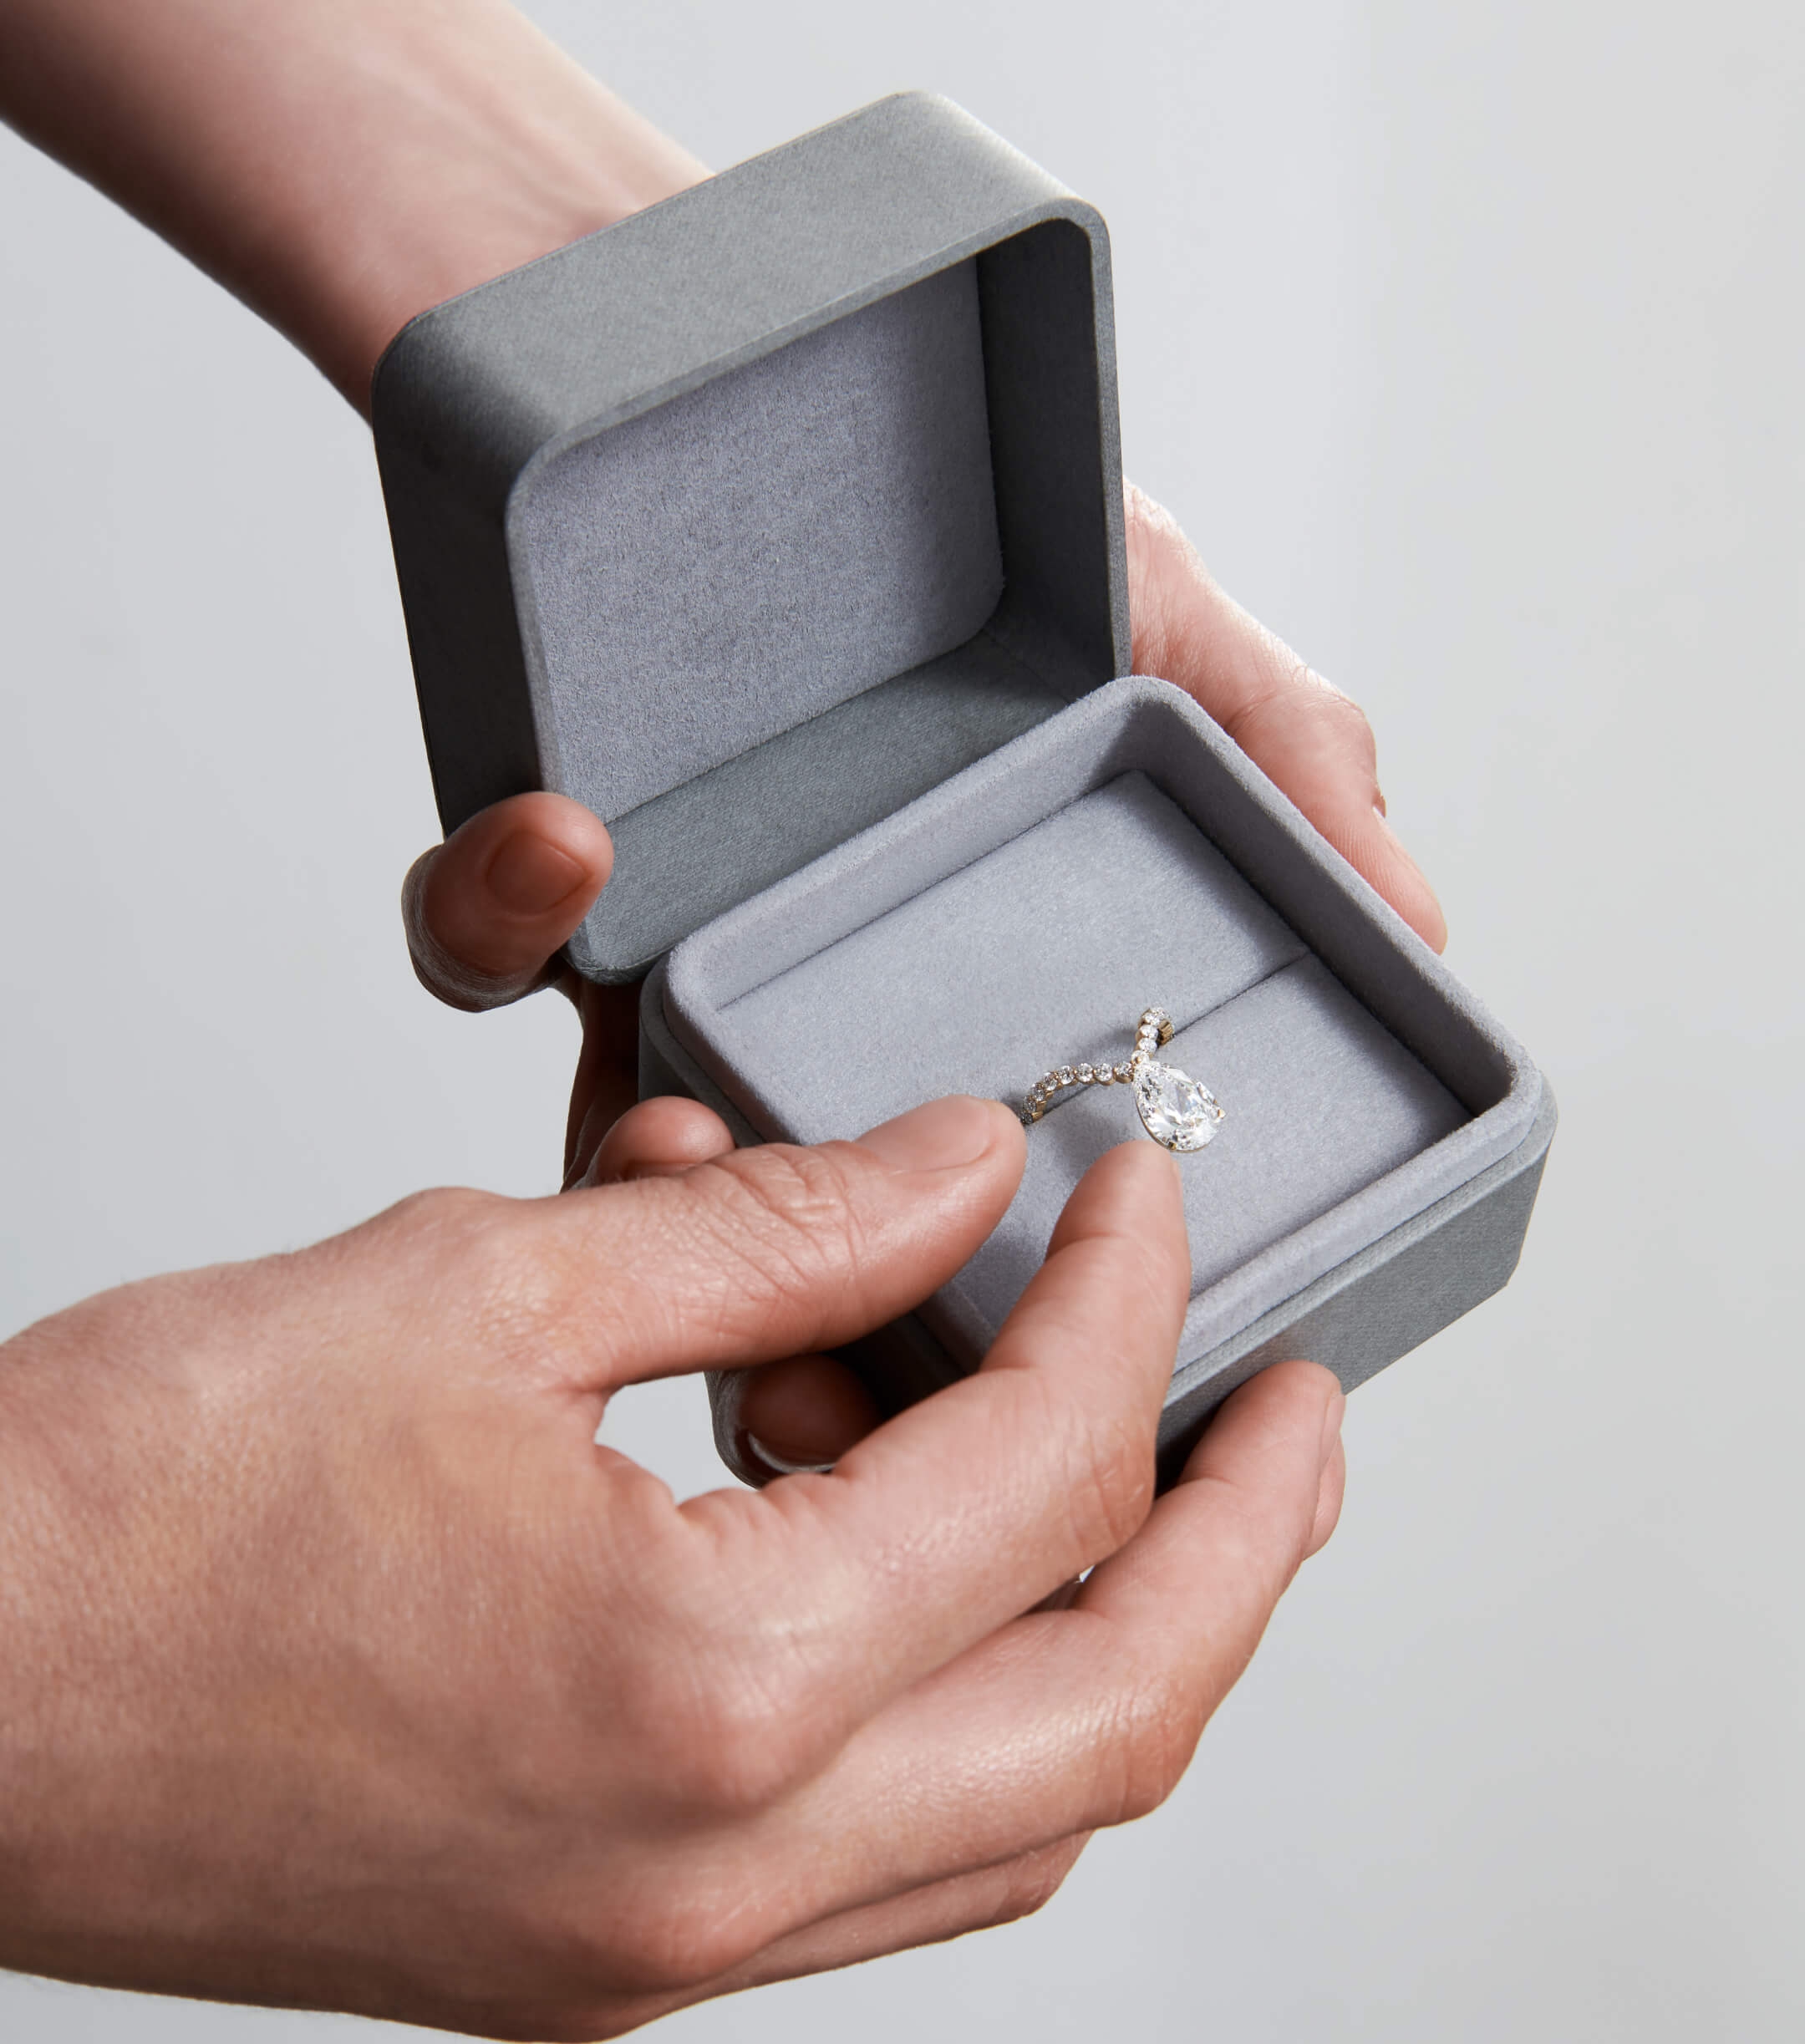 A surprise awaits: a sparkling ring nestled inside a gift box.